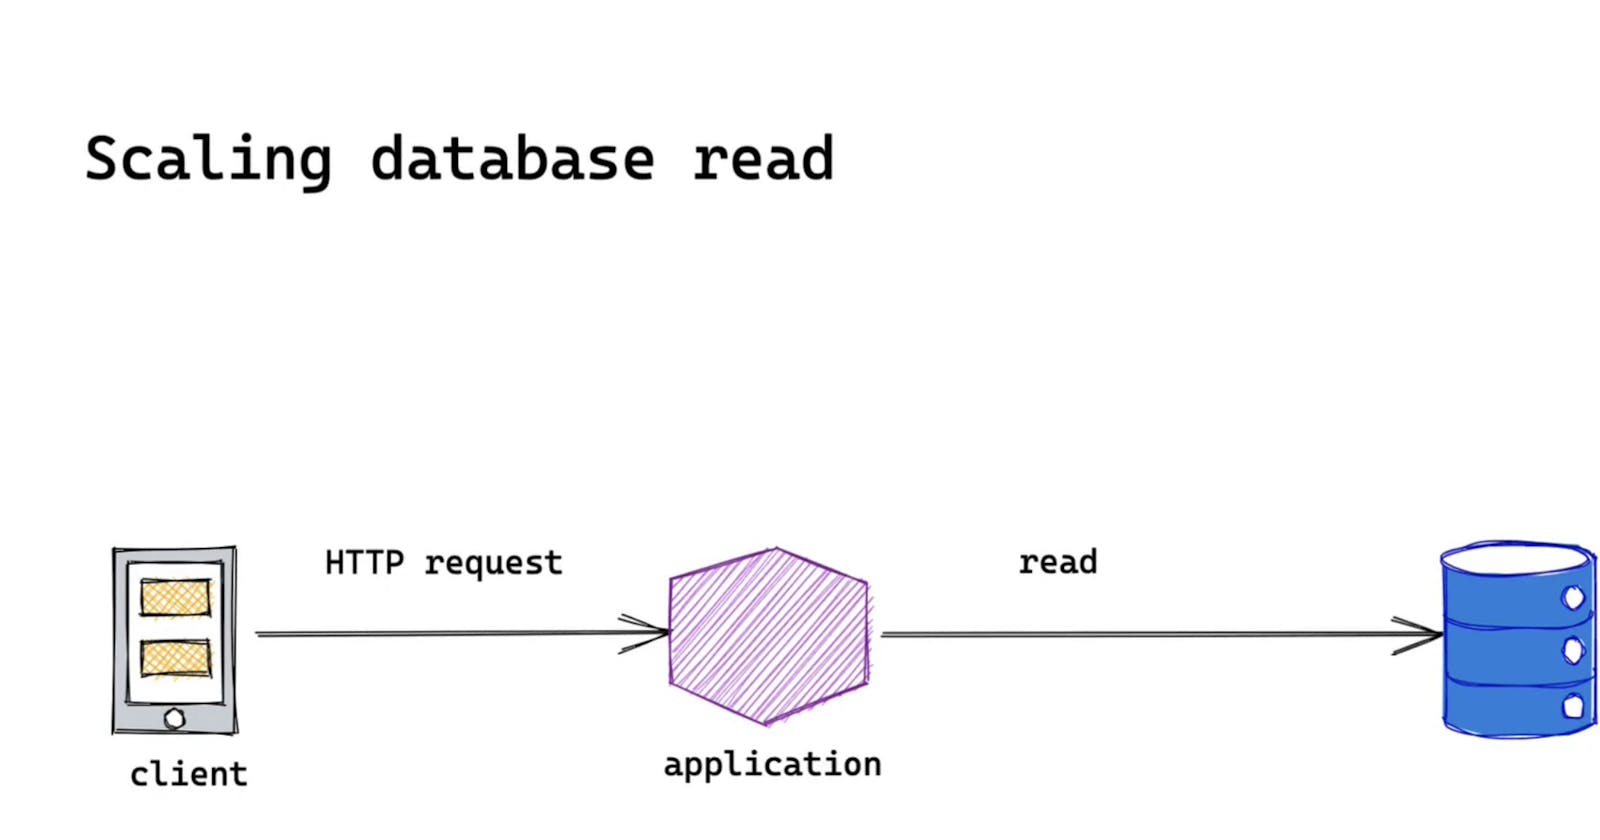 Small system, big system: Scaling read database